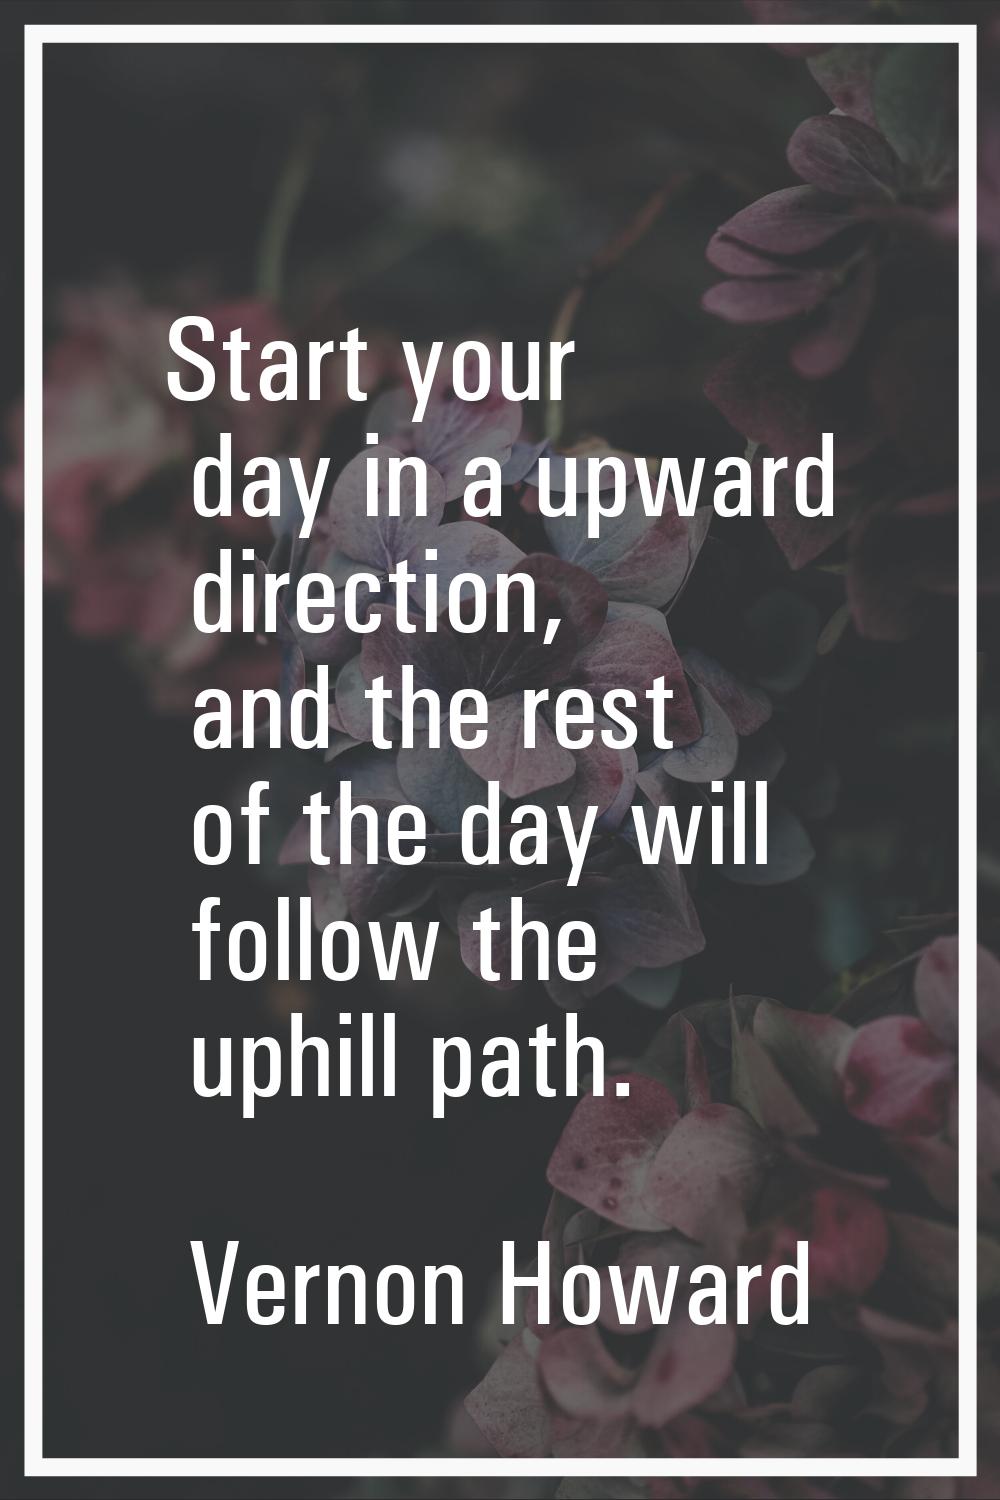 Start your day in a upward direction, and the rest of the day will follow the uphill path.